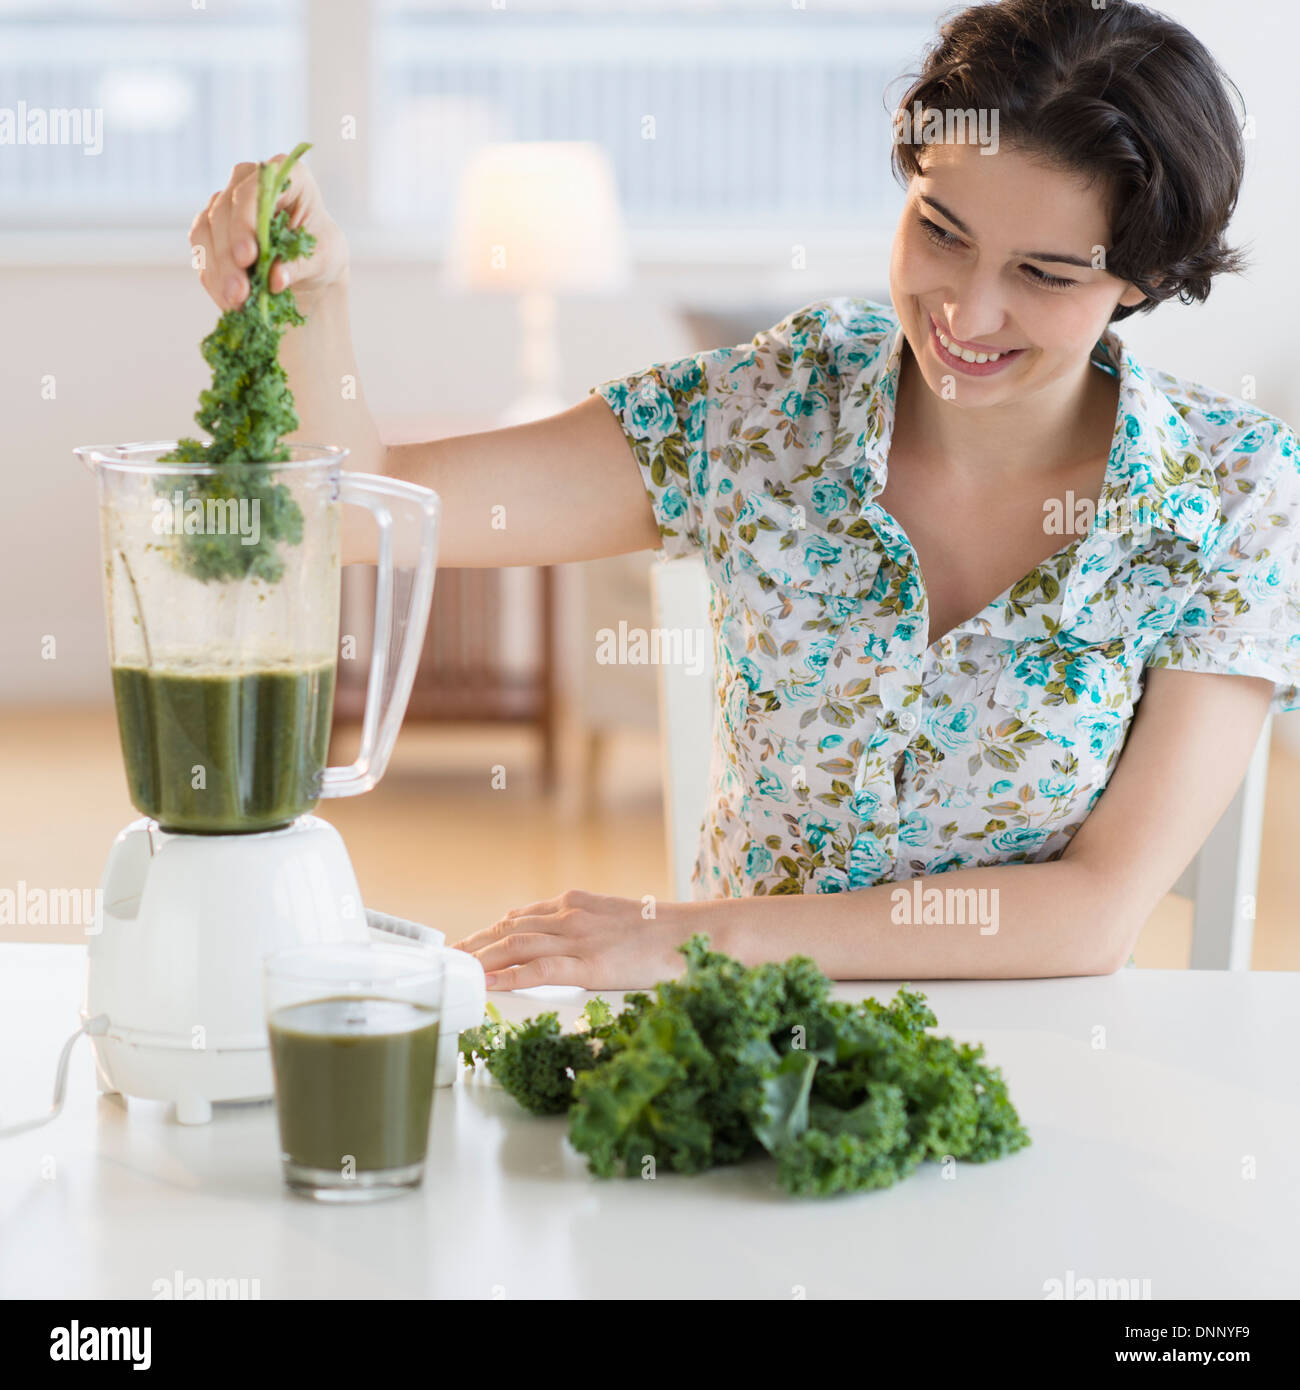 Woman preparing healthy drink with kale Stock Photo